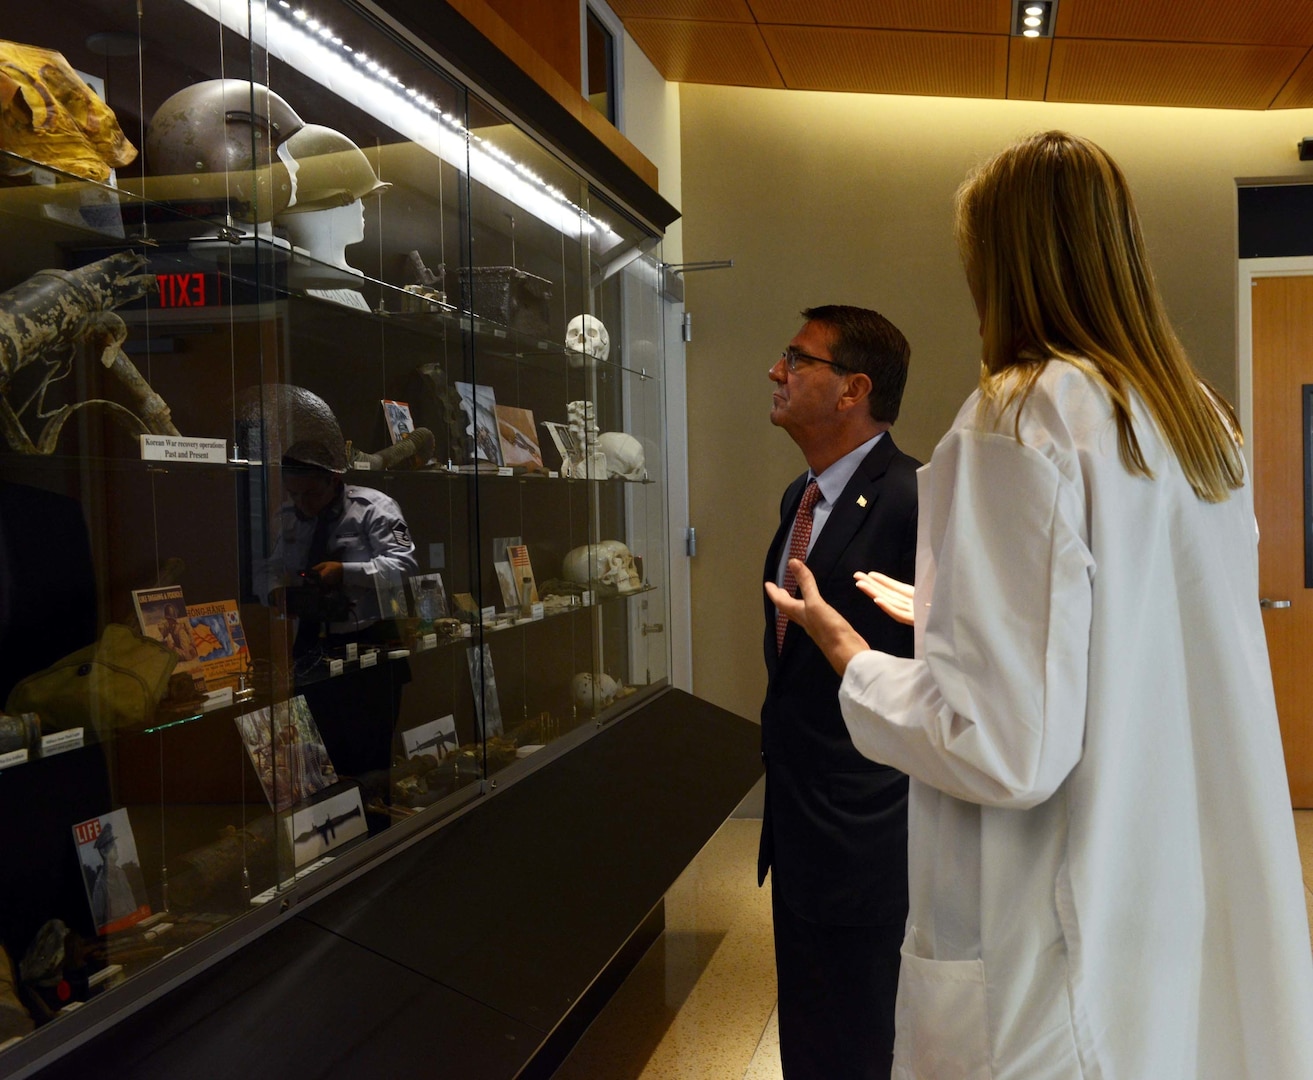 Dr. Debra Zinni, Defense POW/MIA Accounting Agency forensic anthropologist, speaks about artifacts stored in the DPAA laboratory with Secretary of Defense Ash Carter. While at DPAA, he spoke with service members about the importance of the agency's joint mission in the Indo-Asia Pacific region. The mission of the Defense POW/MIA Accounting Agency is to provide the fullest possible accounting for our missing personnel to their families and the nation. (U.S. Air Force photo by Staff Sgt. La'Shanette Garrett)